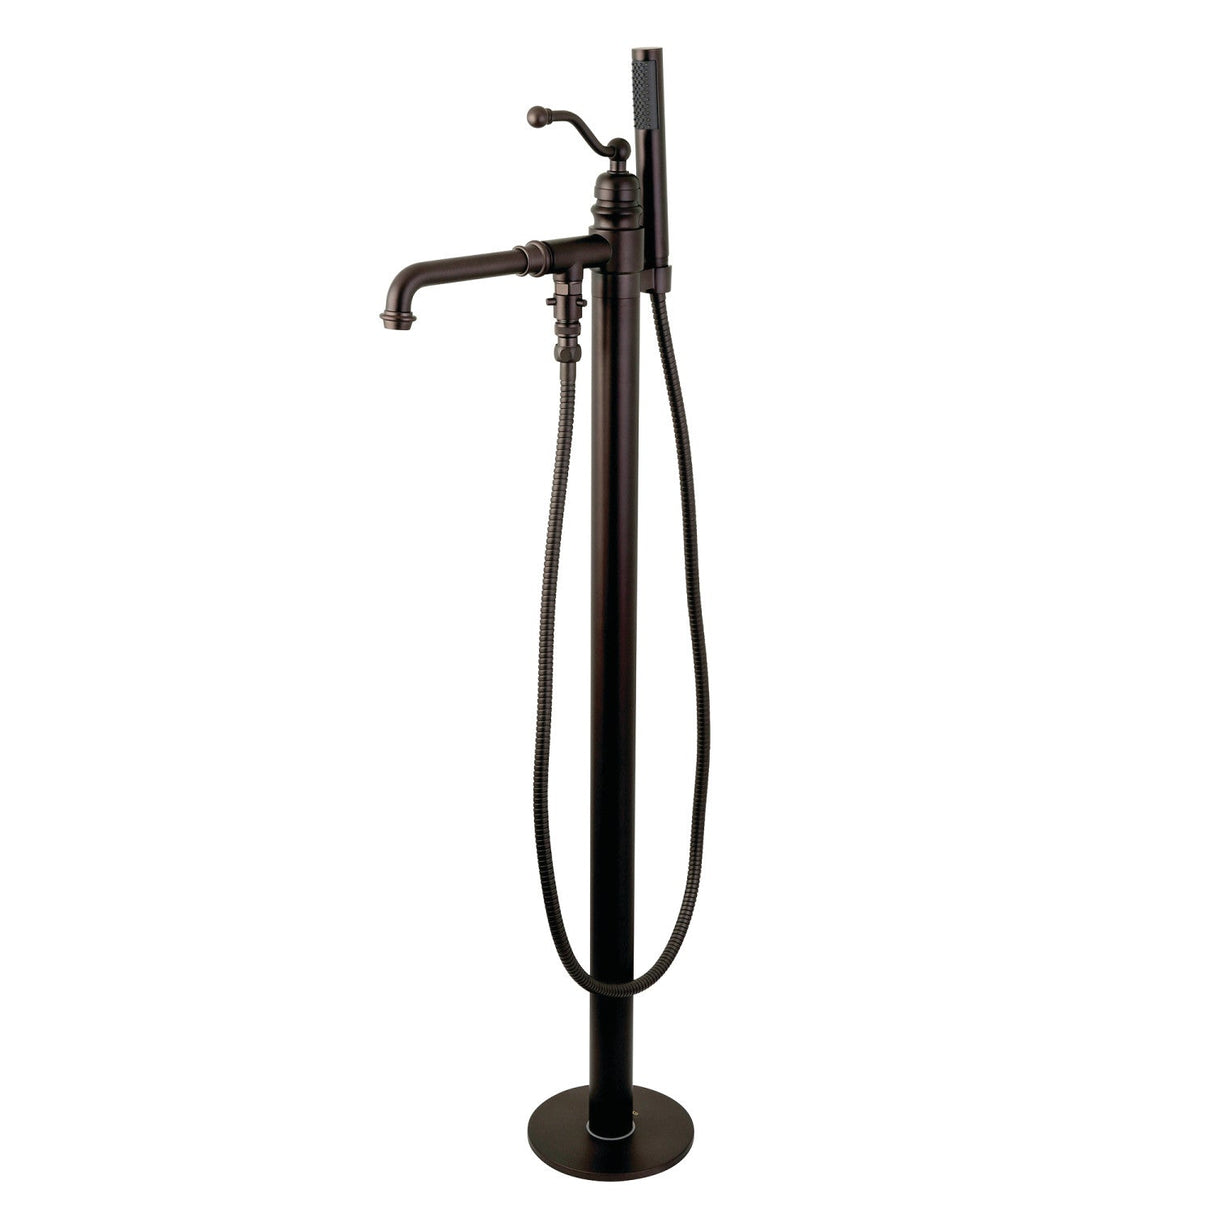 English Country KS7035ABL Single-Handle 1-Hole Freestanding Tub Faucet with Hand Shower, Oil Rubbed Bronze